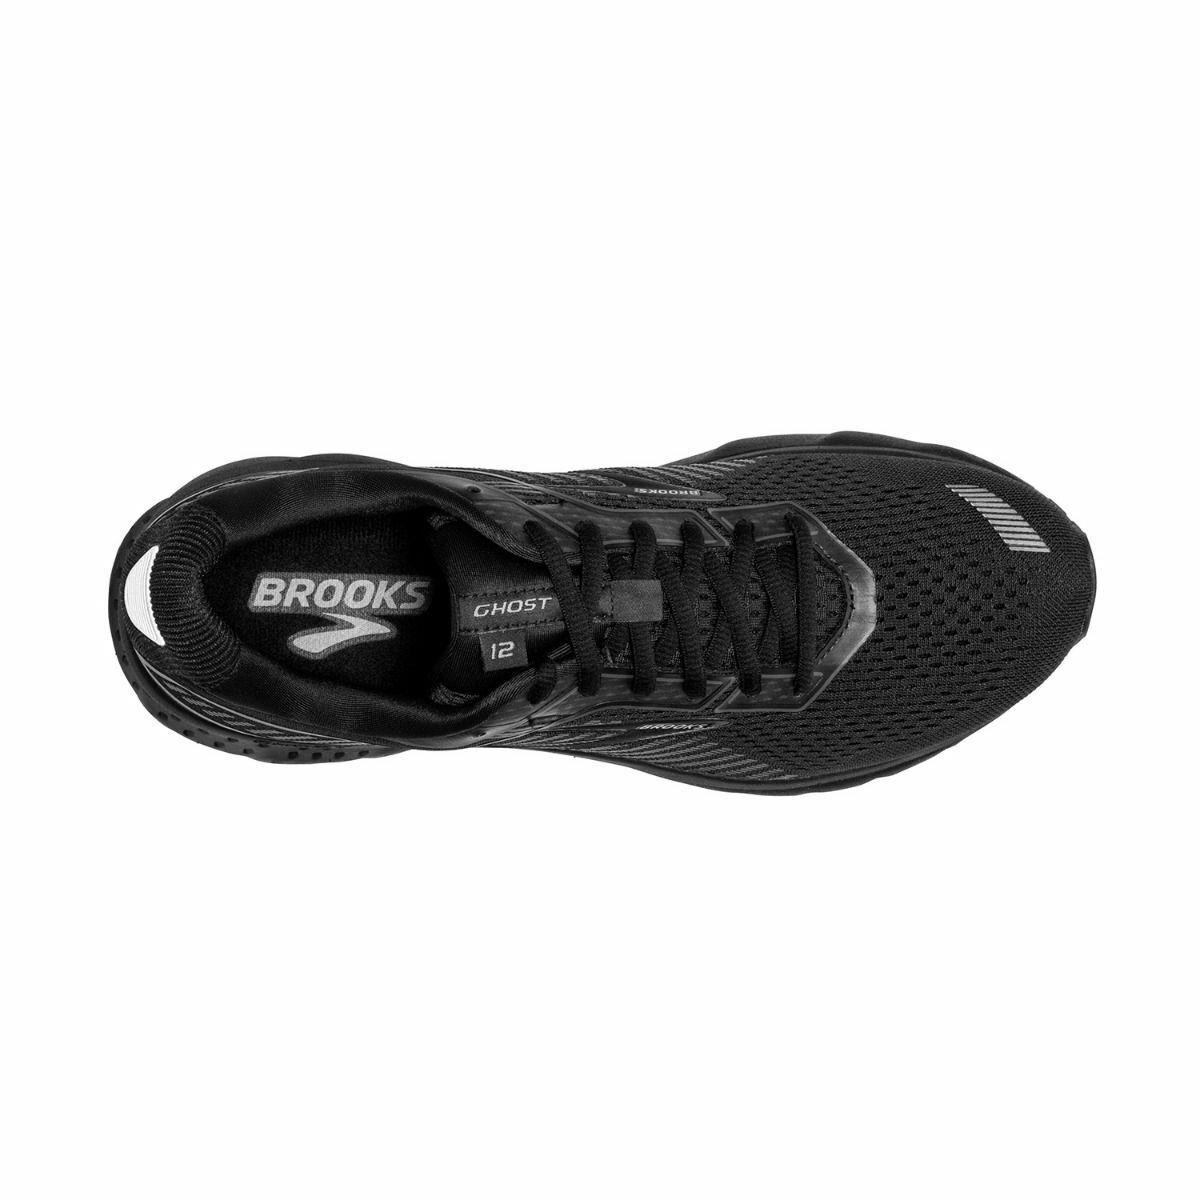 Brooks shoes Ghost - Black 1